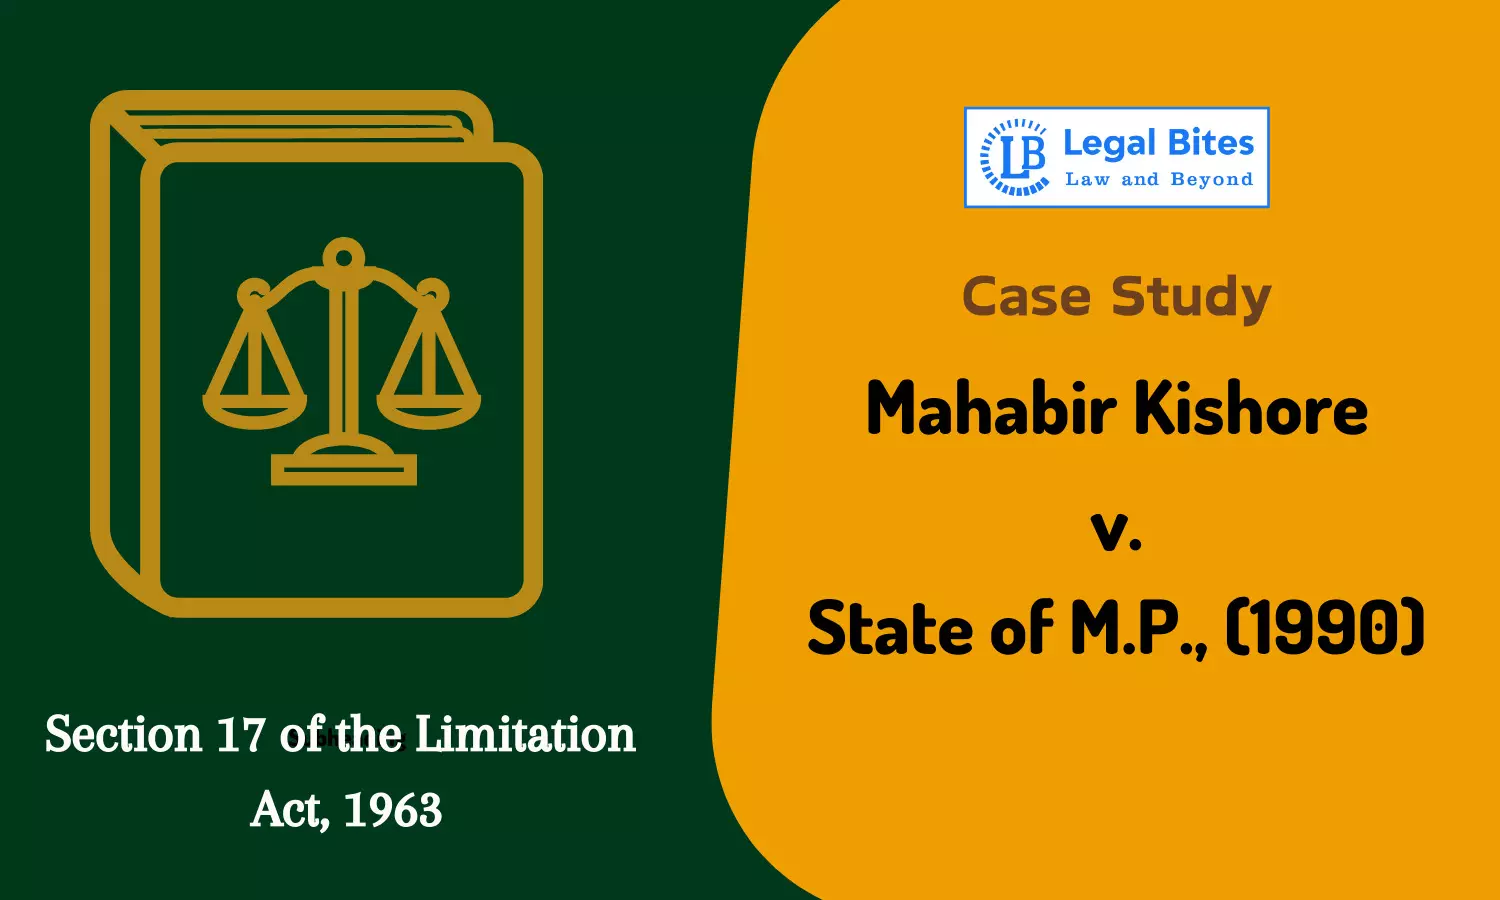 Case Study: Mahabir Kishore v. State of M.P., (1990) | Section 17 of the Limitation Act, 1963